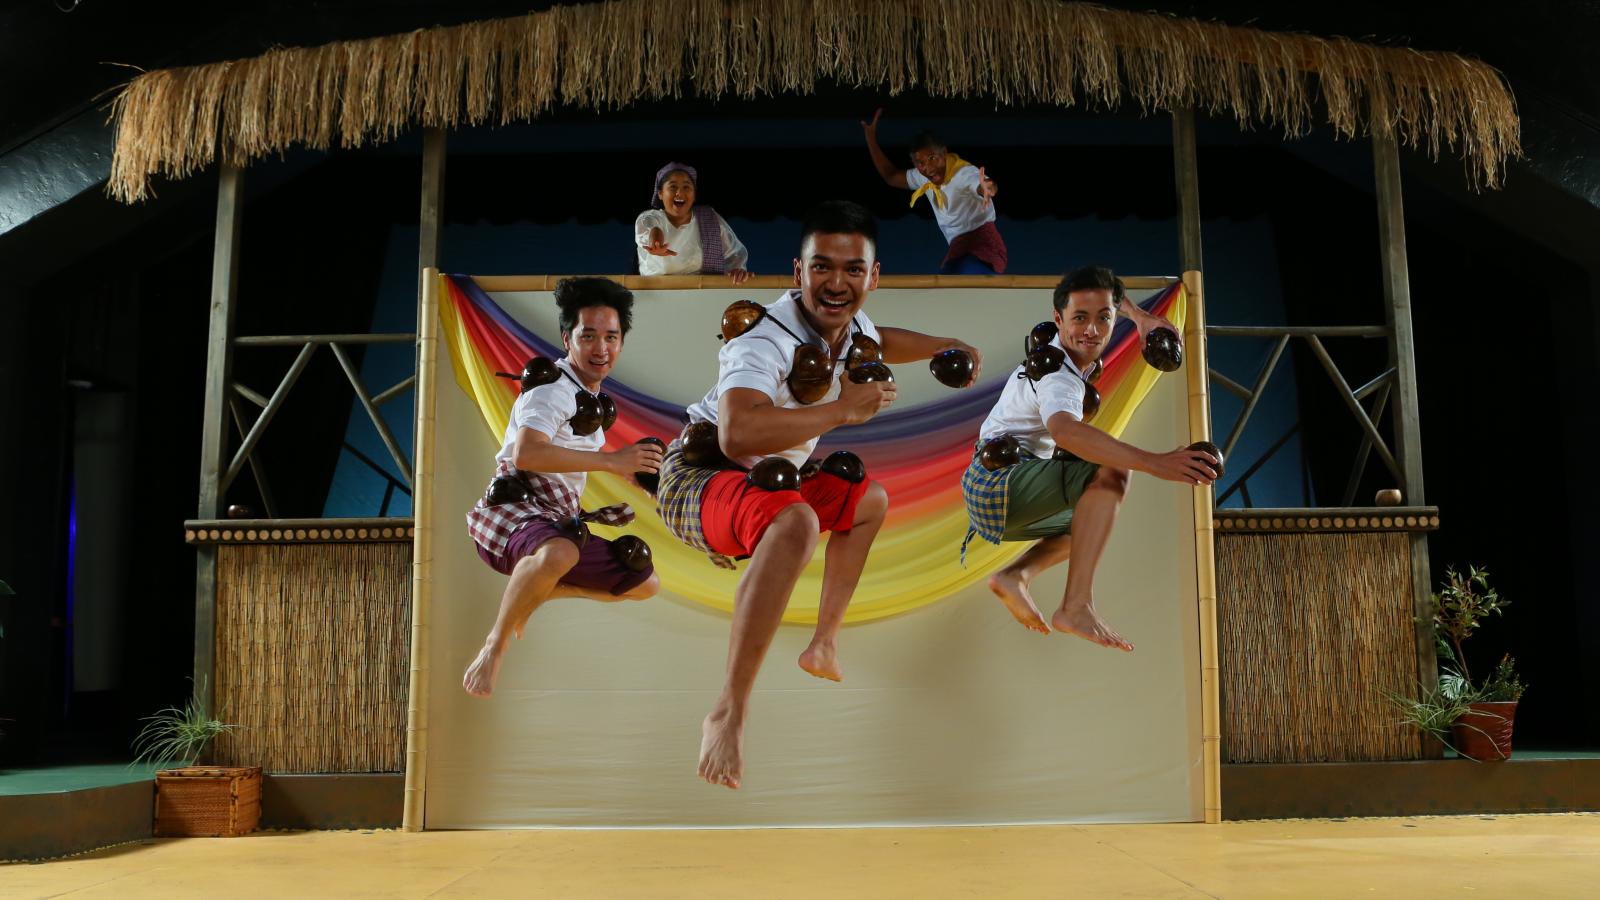 Three men onstage jump high in the air while actors behind them watch as they reenact a traditional Filipino folktale